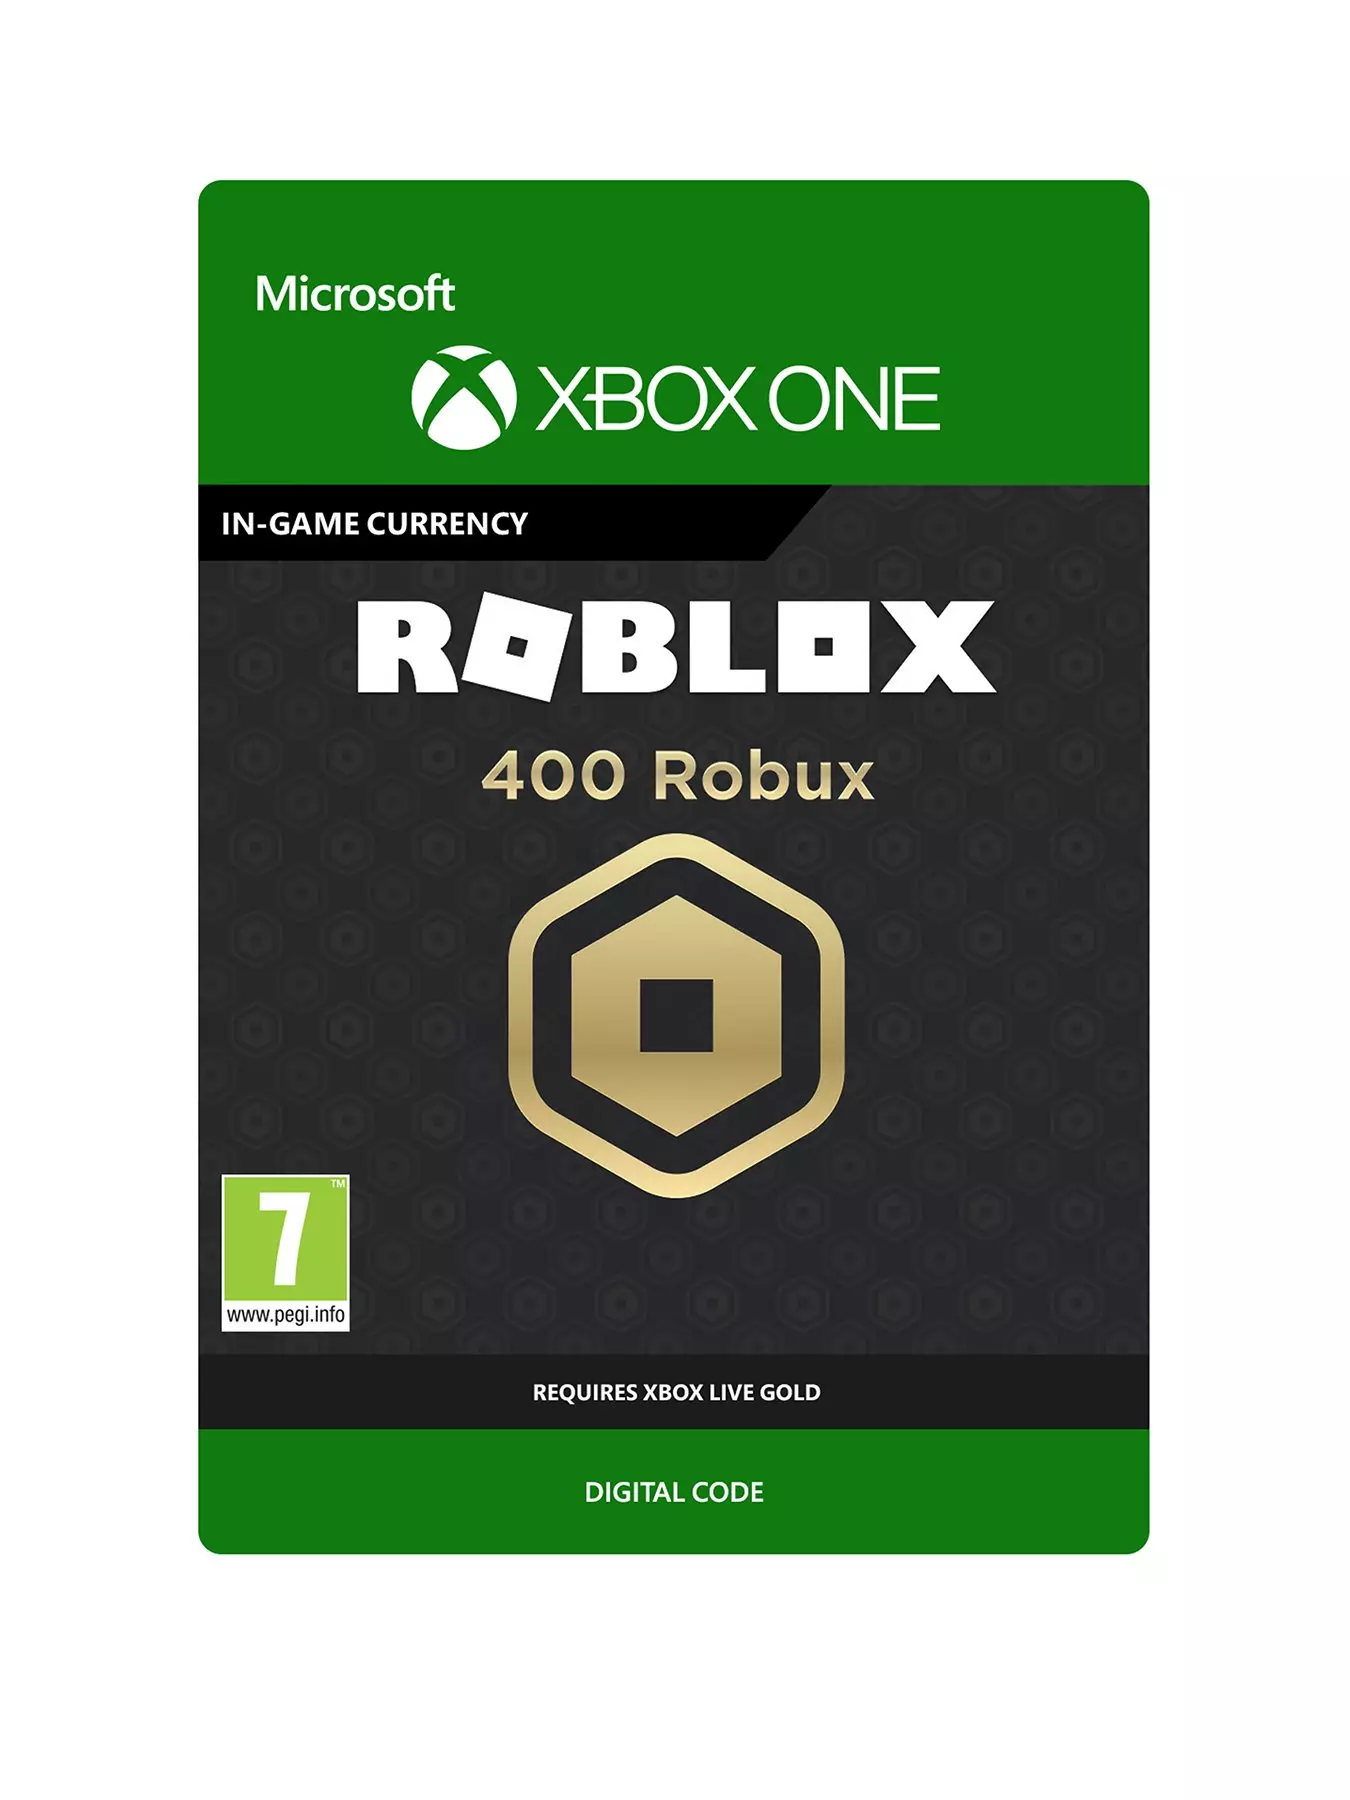 Xbox One Games Gaming Dvd Www Littlewoods Com - they changed the price of ninja animation 750 to 400 robux